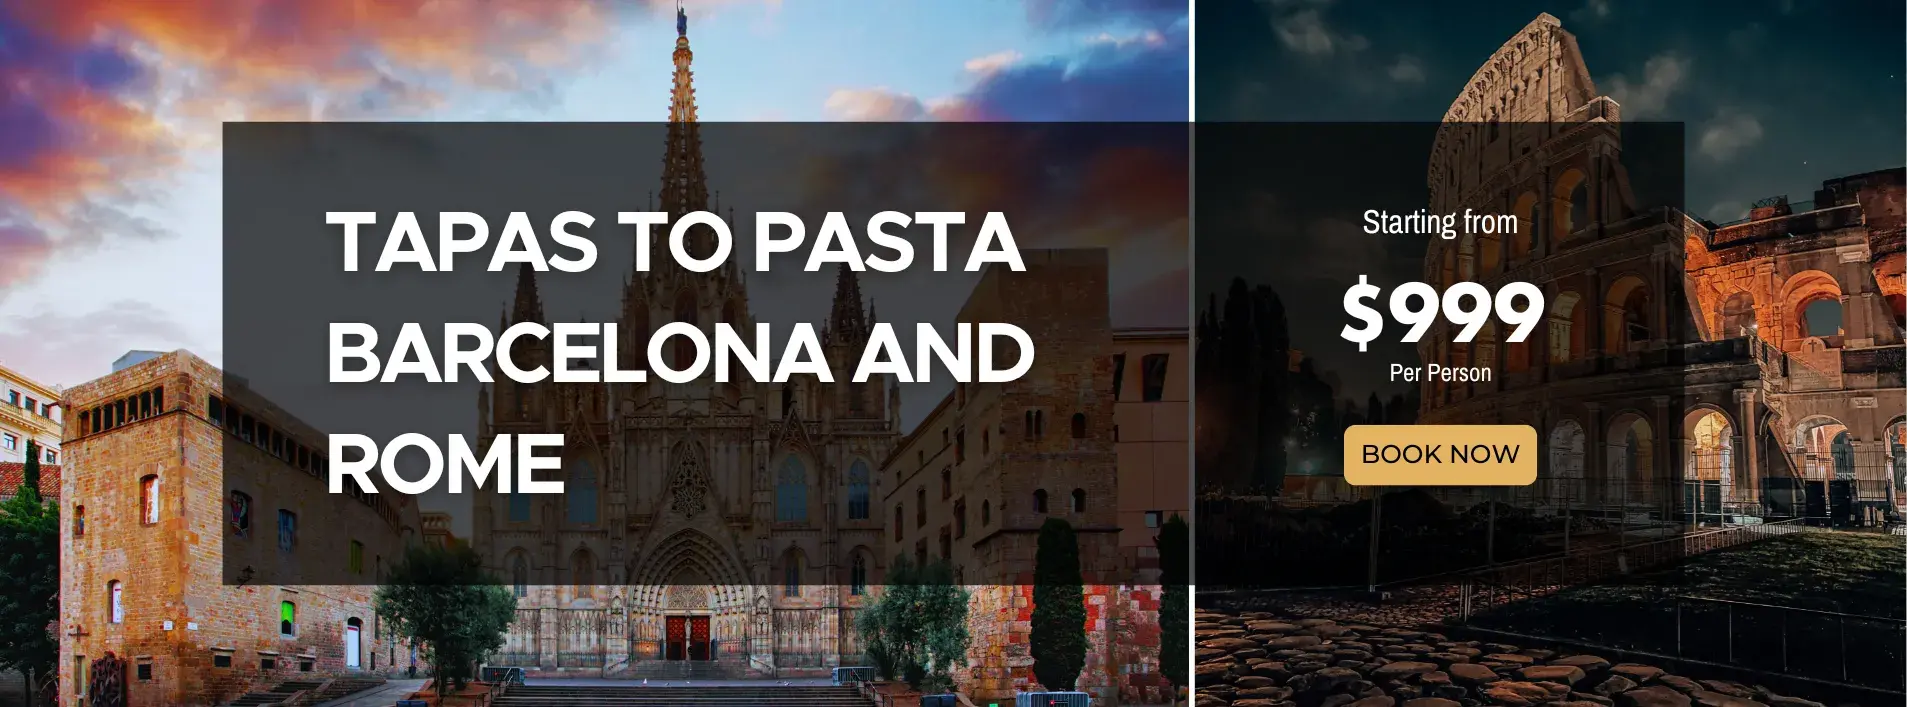 Tapas to Pasta Barcelona and Rome with tours